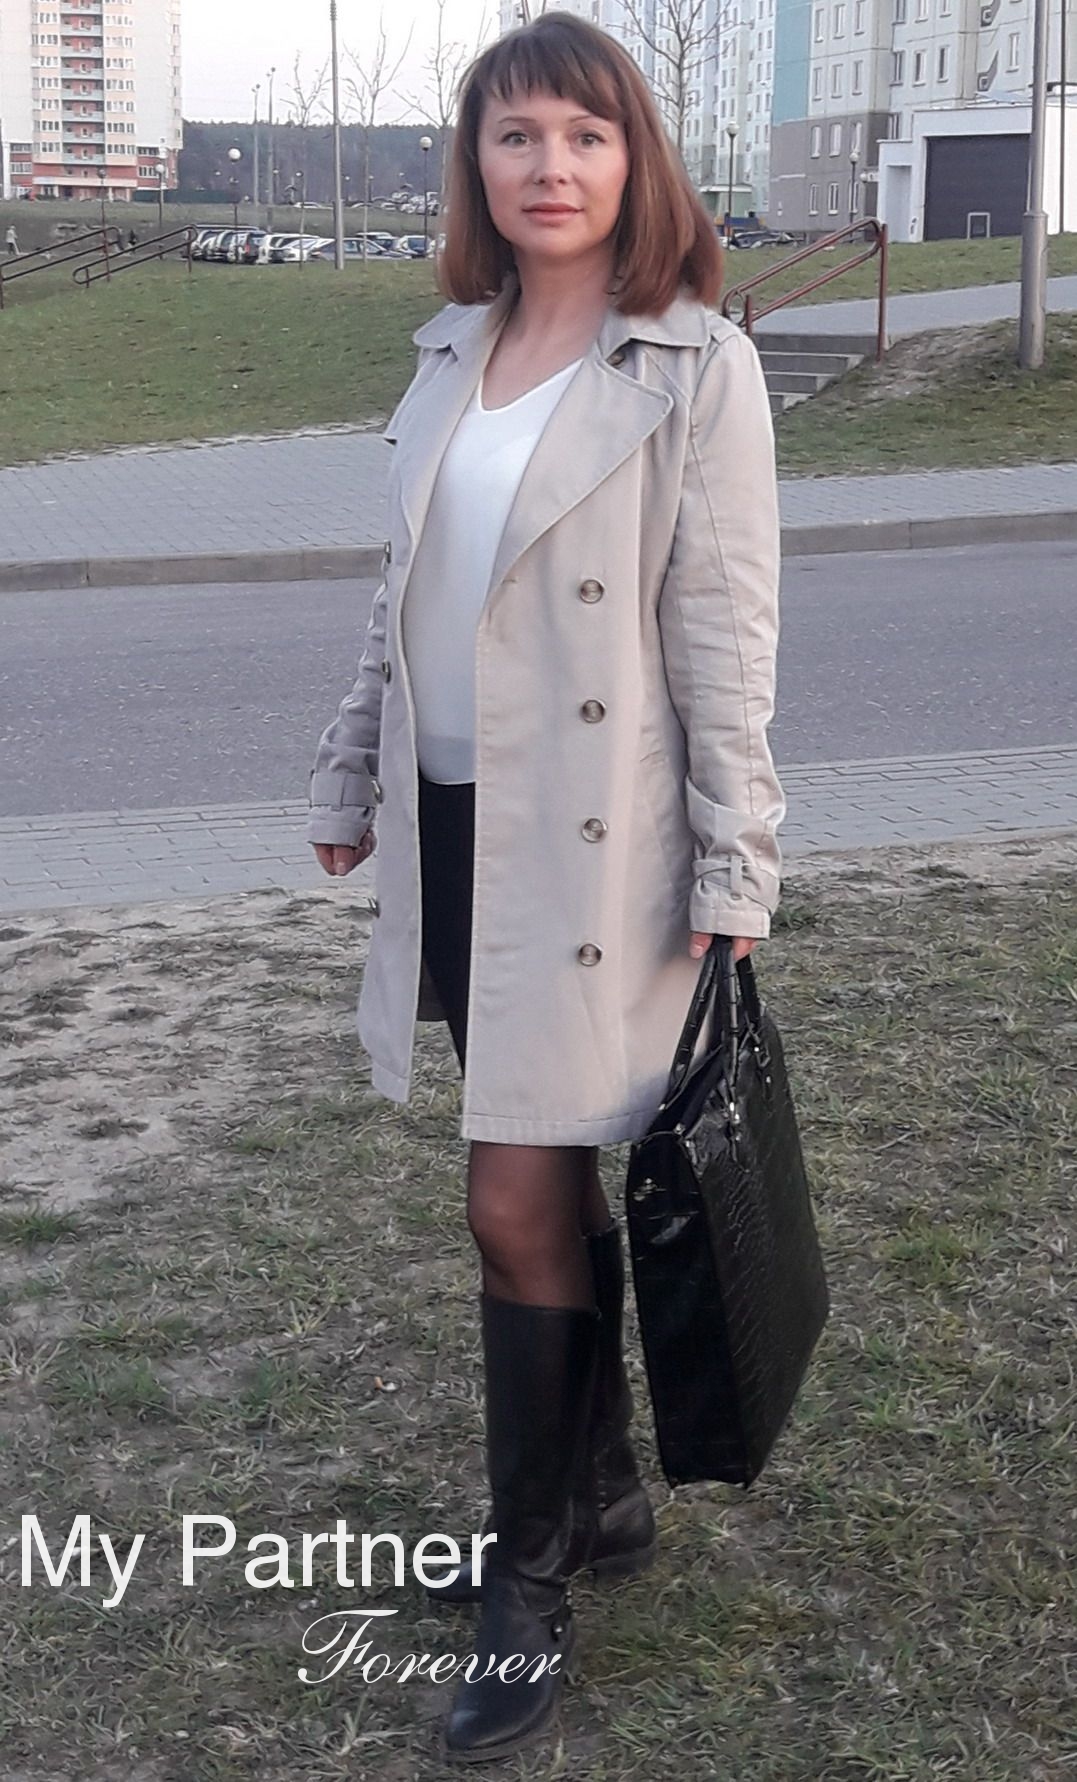 Charming Woman from Belarus - Irina from Grodno, Belarus